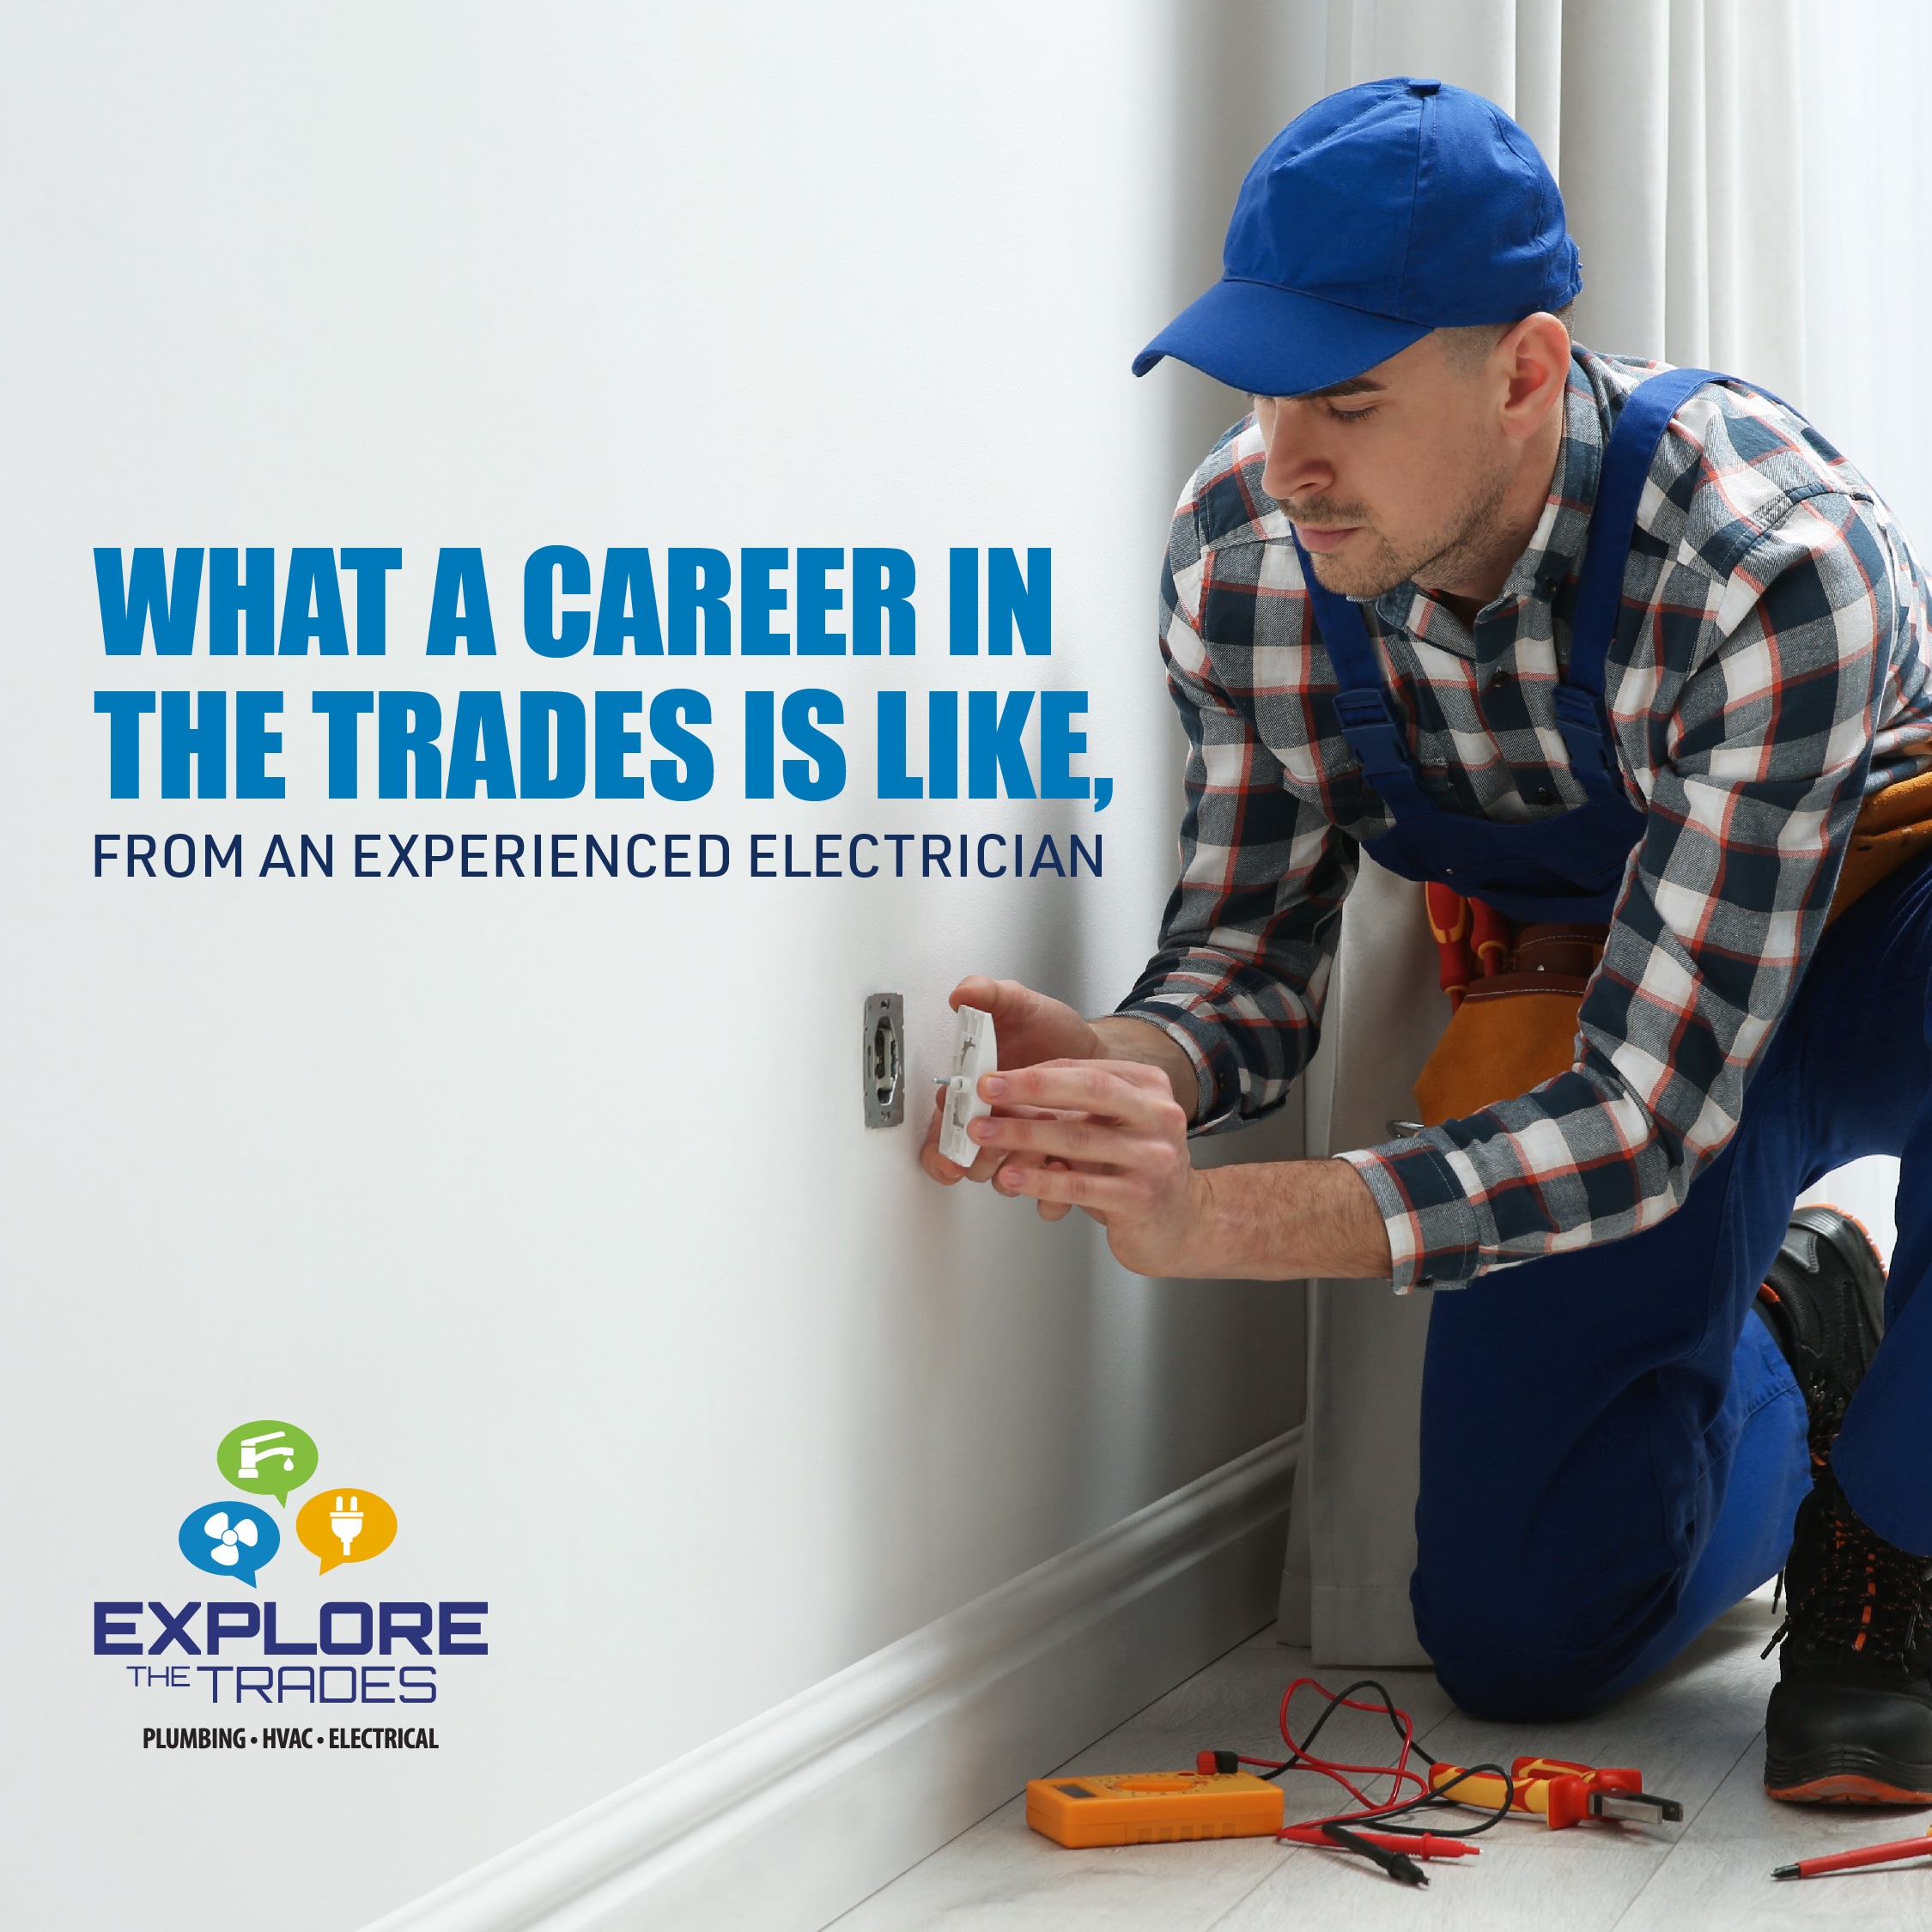 Trade School Experiences: What A Career in the Trades is Like, from an Experienced Electrician featured image